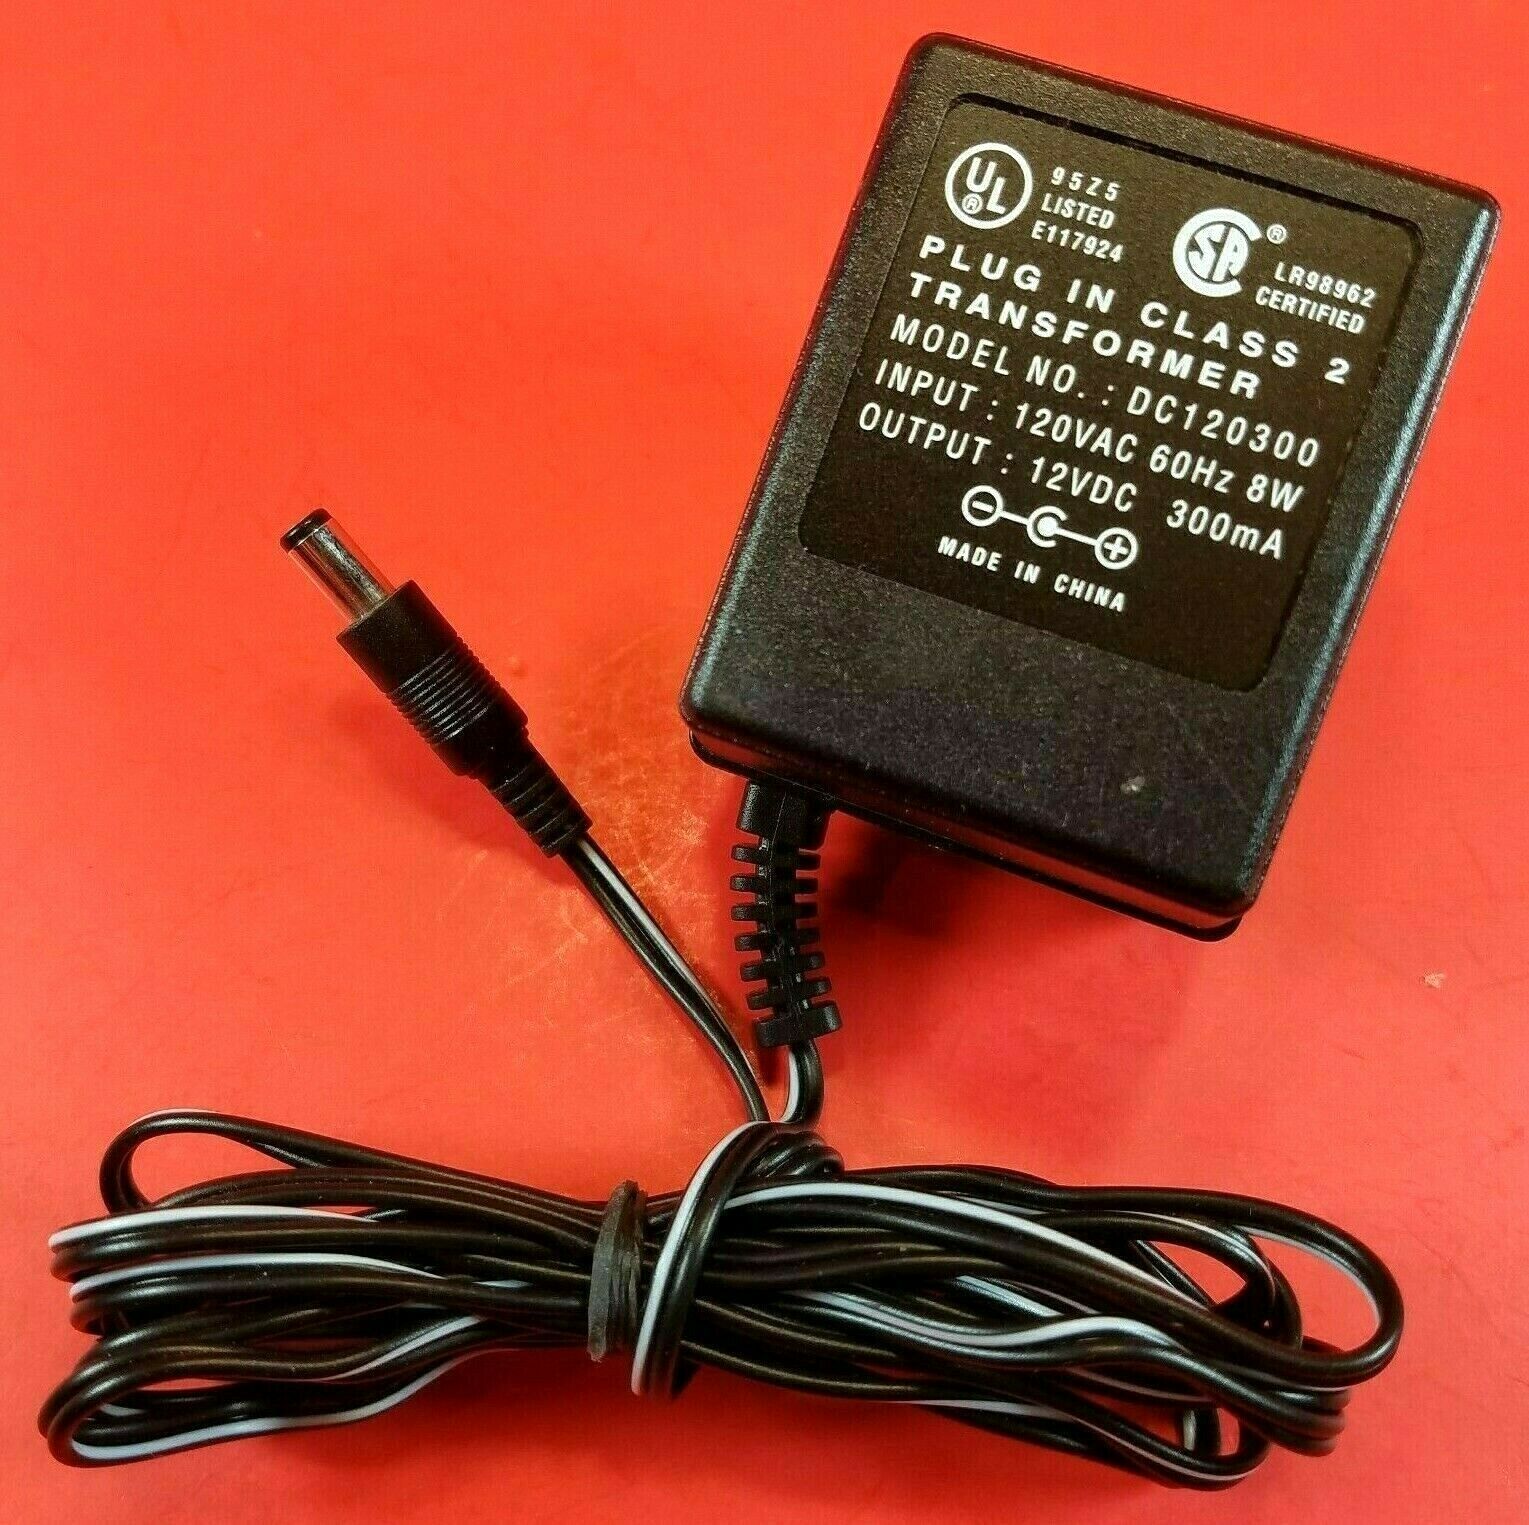 Plug In Class 2 Transformer DC120300 Power Supply 12V - 300mA OEM AC/DC Adapter Type: AC Adapter Output Voltage: 12 V - Click Image to Close